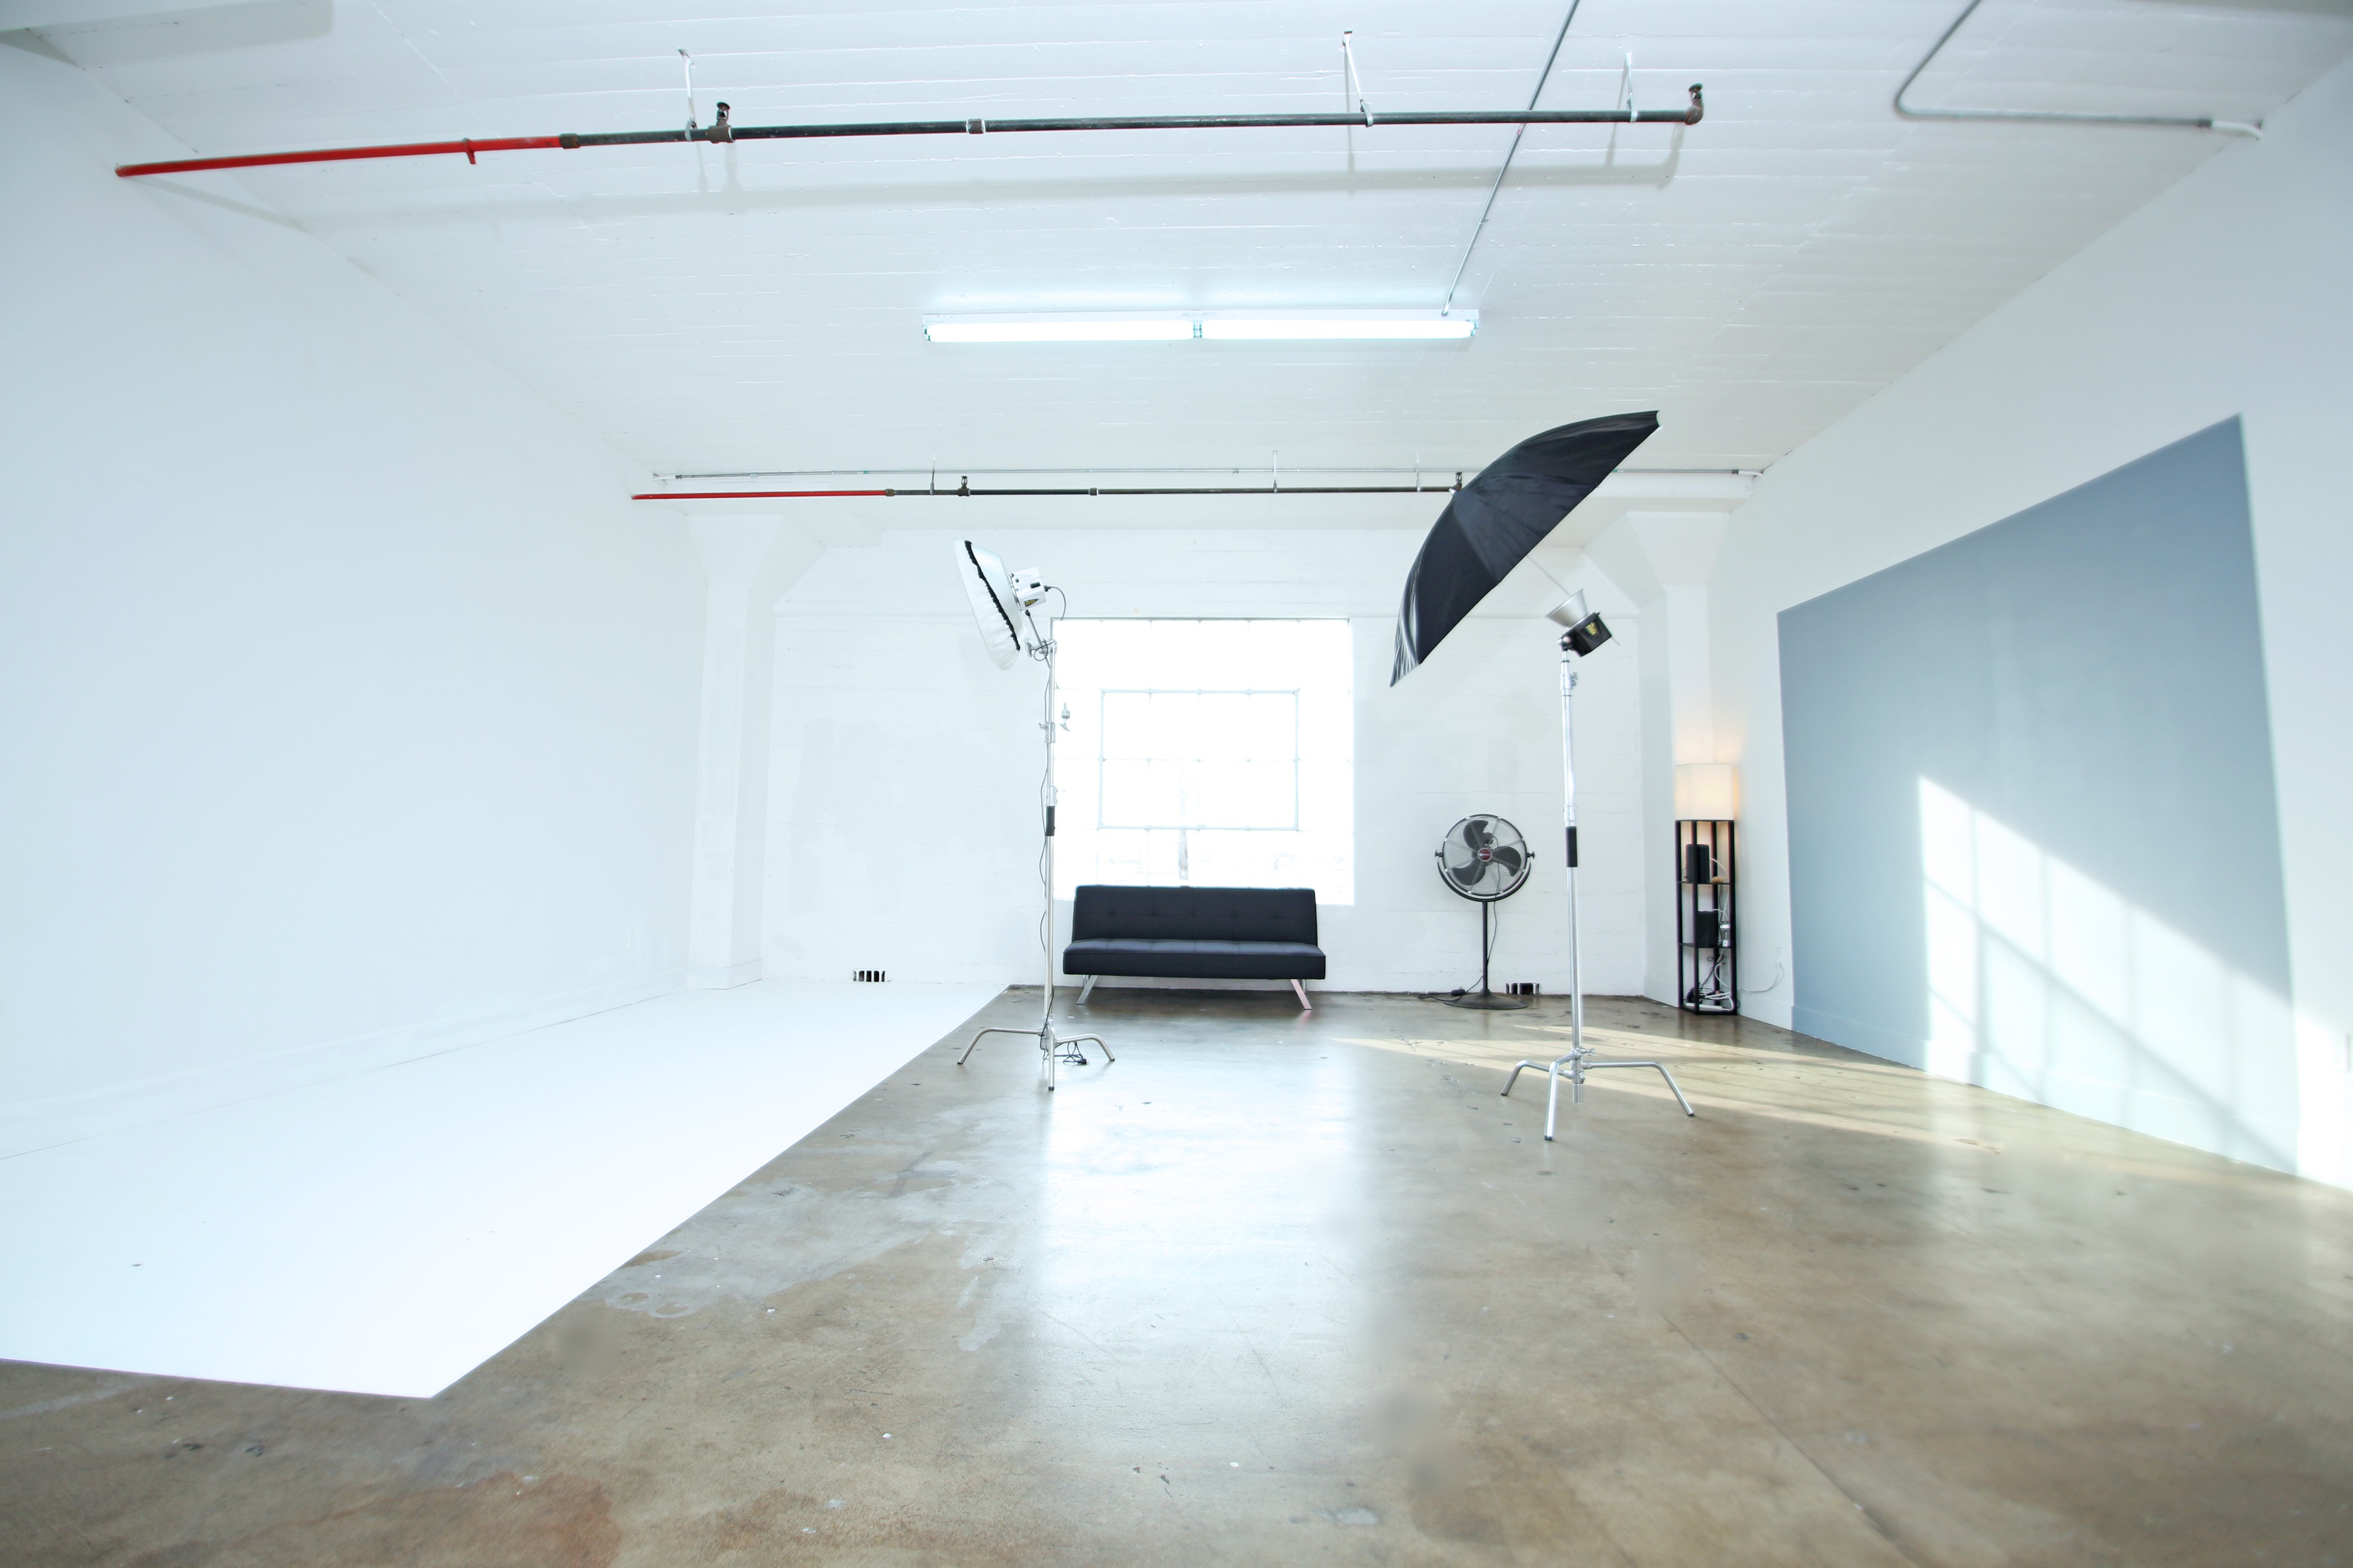 Large Professional Studio with Natural Light